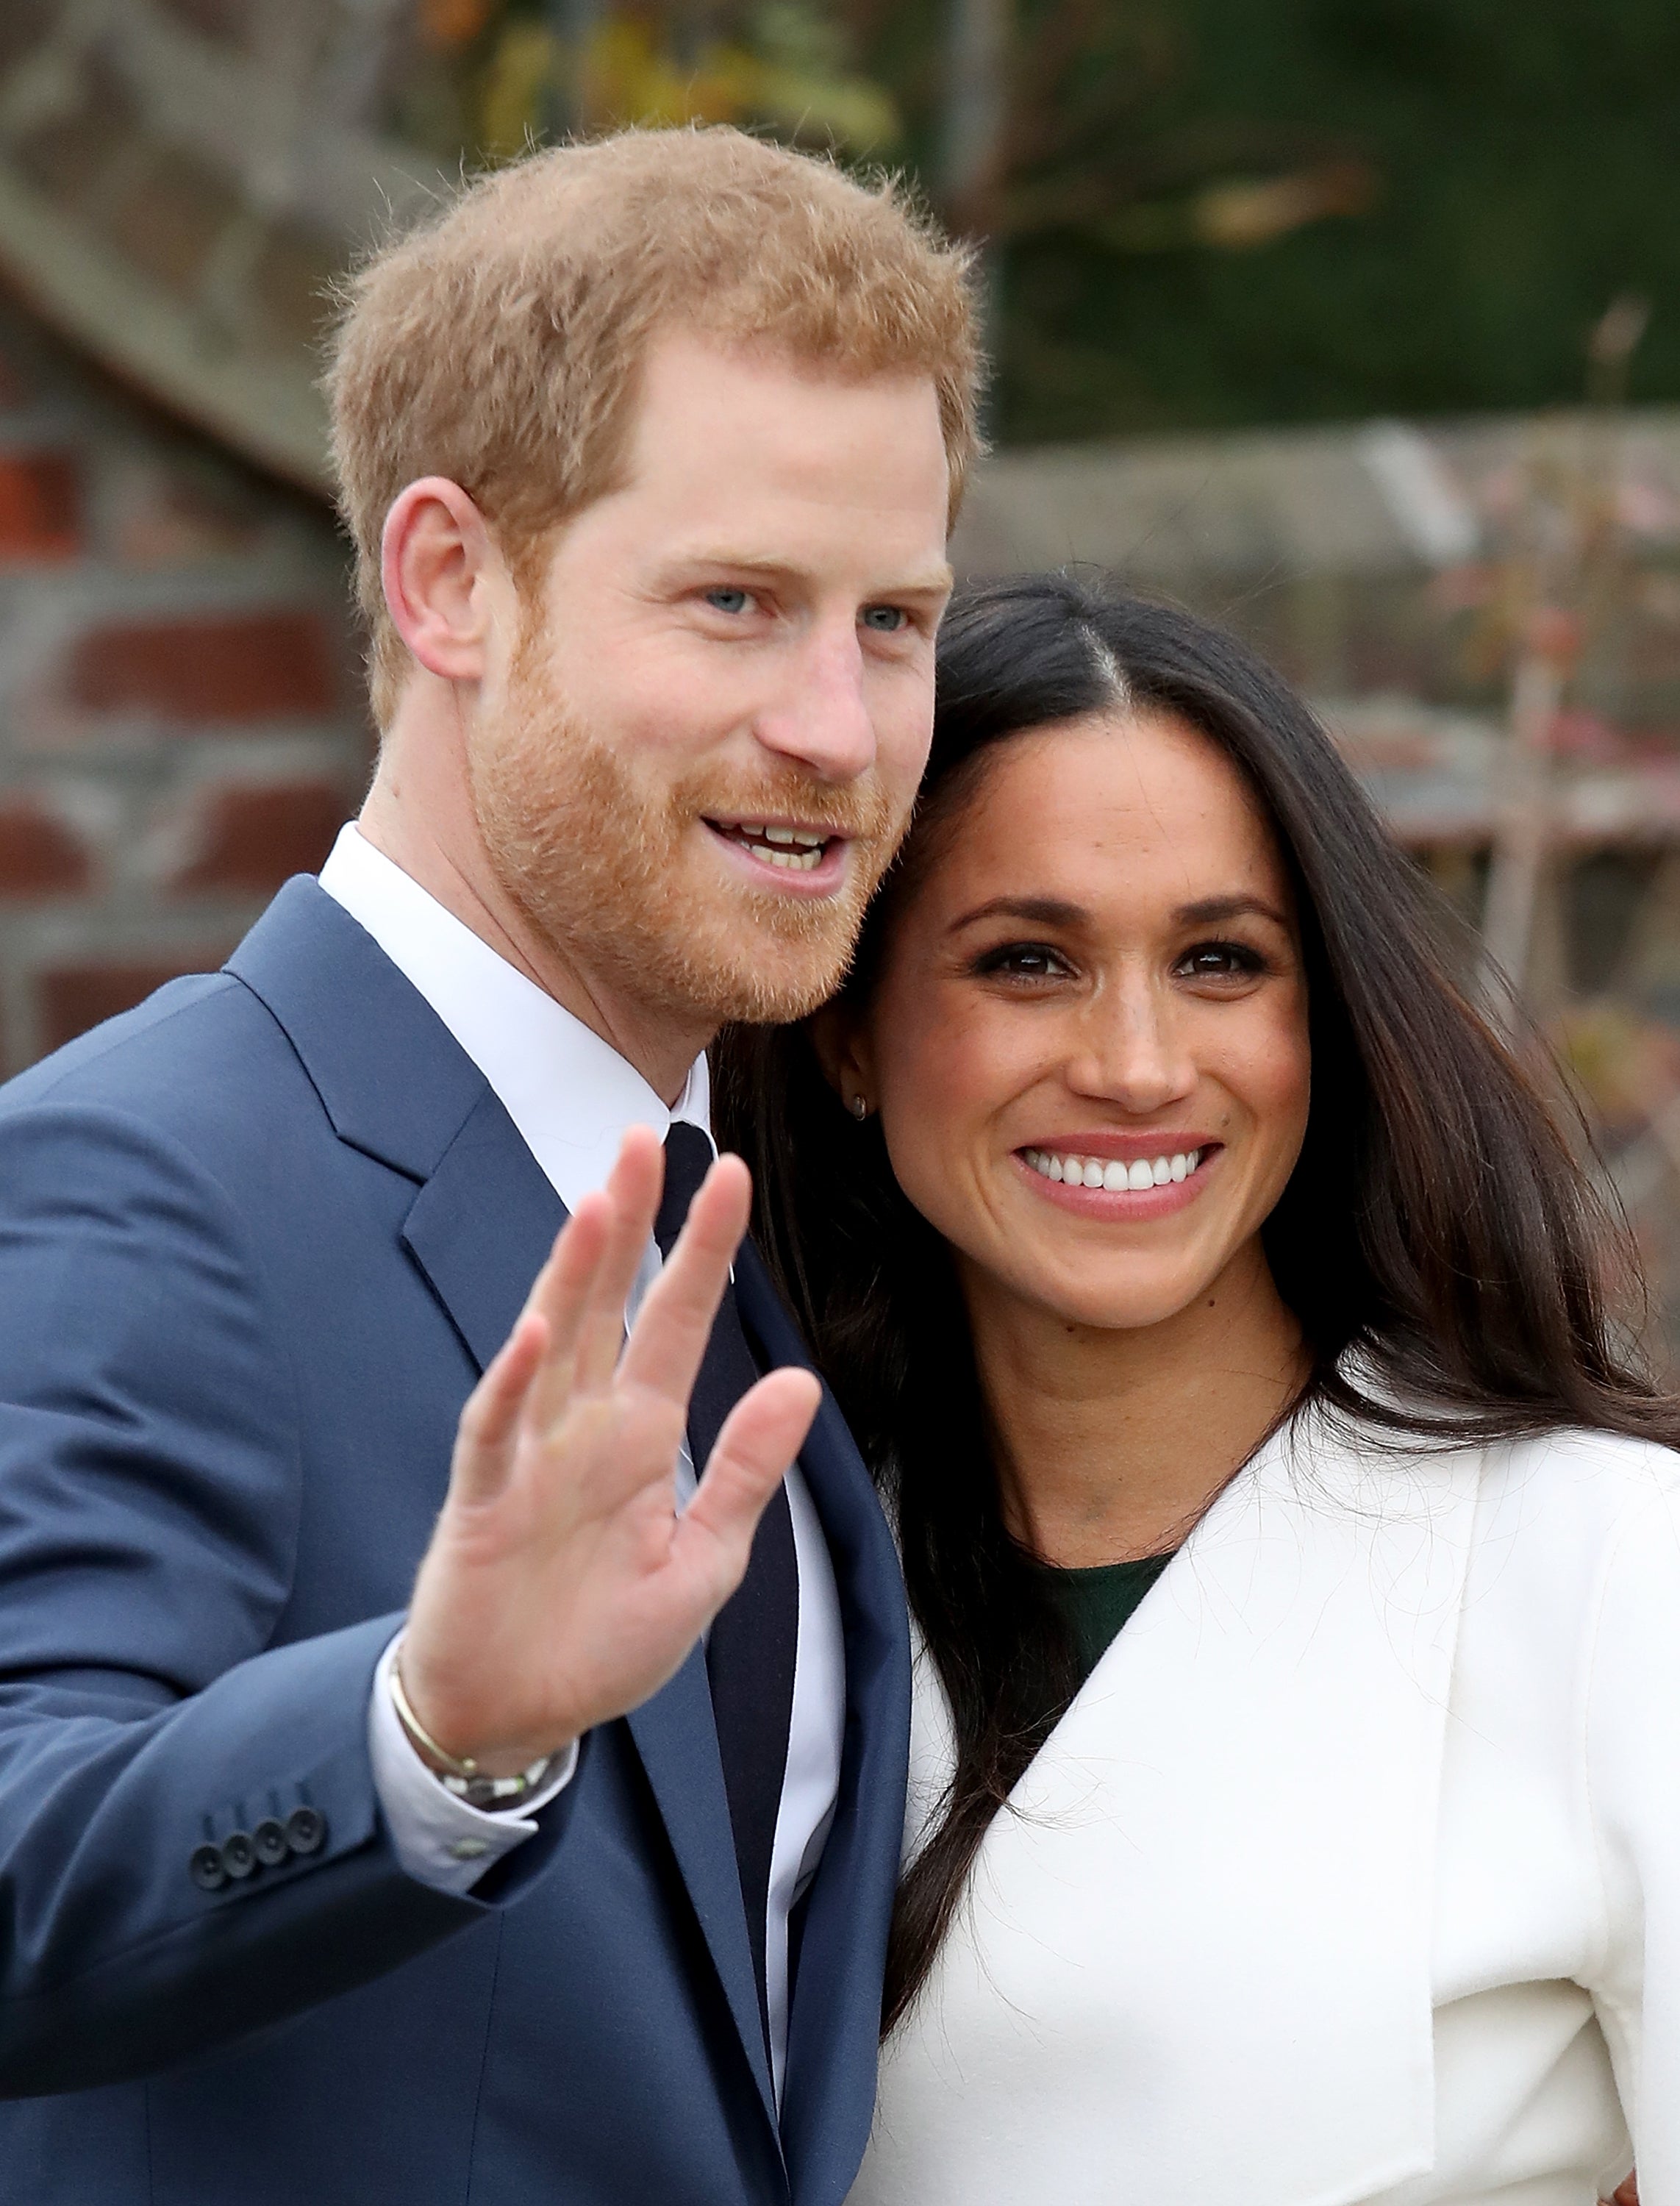 We Have a Date! Prince Harry and Meghan Markle Reveal When Their Wedding Will Take Place
